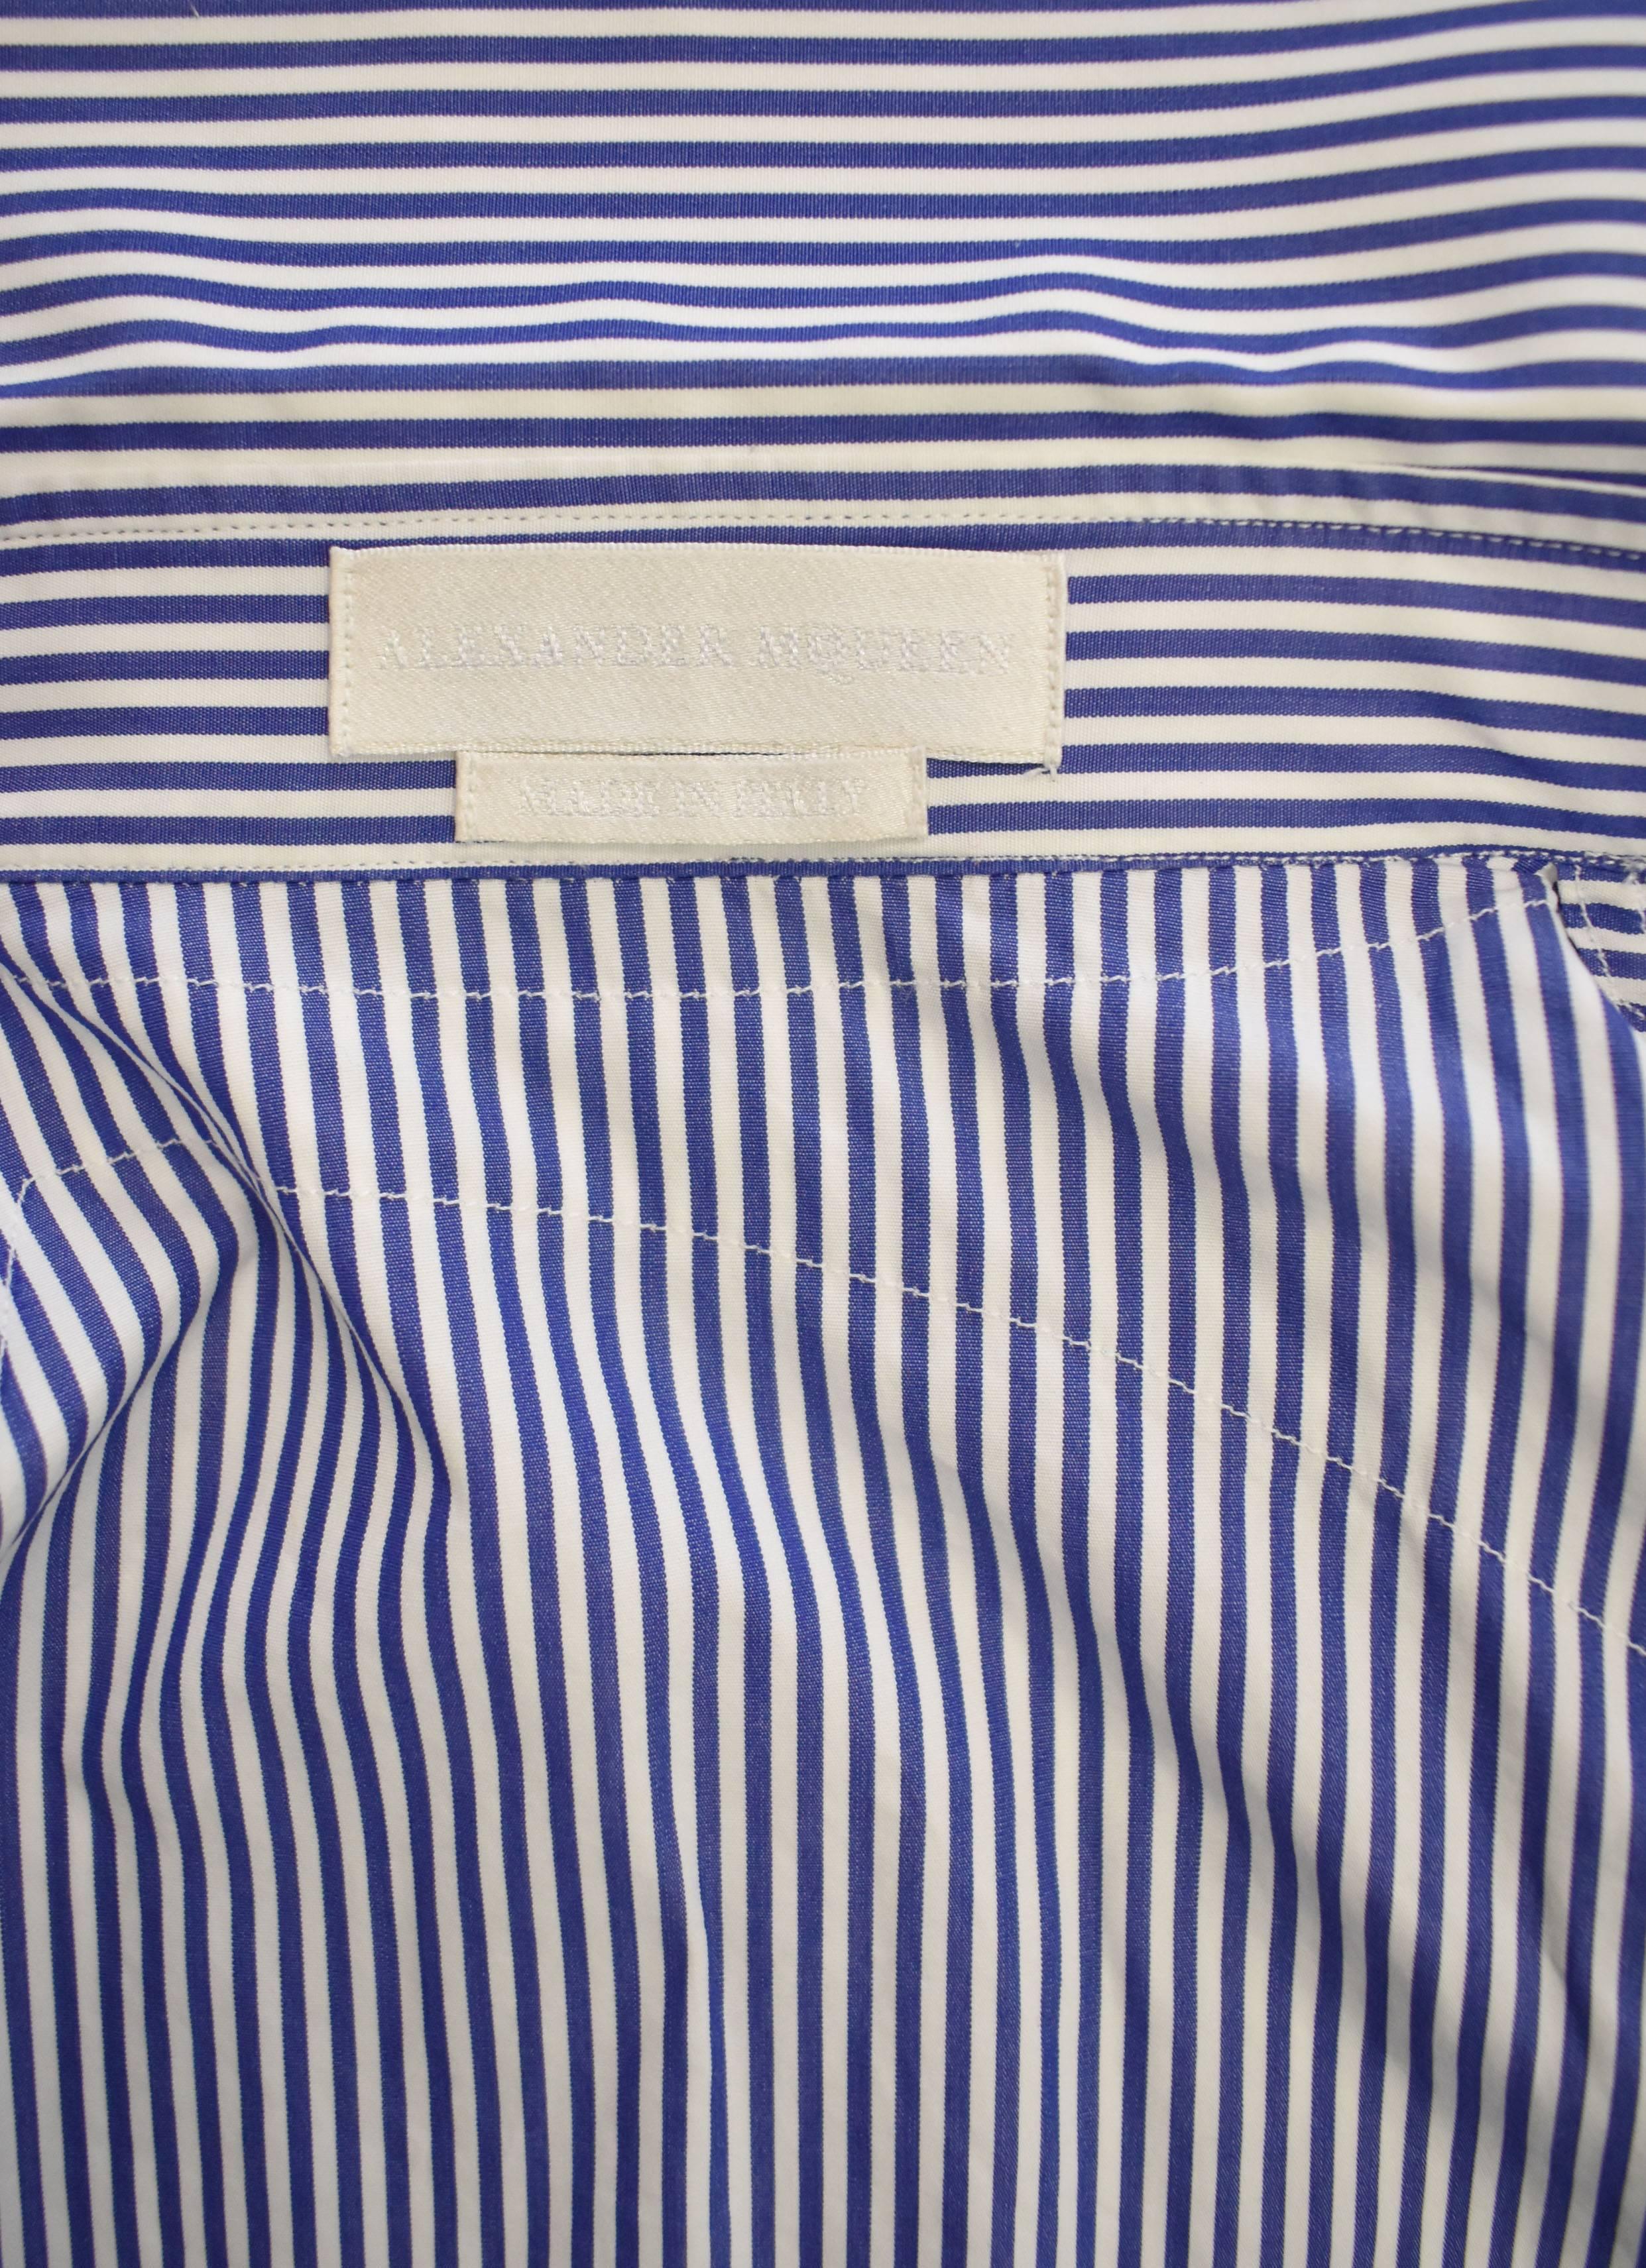 Alexander McQueen White & Blue Stripe Shirt with Harness Press Sample A/W 2015 2